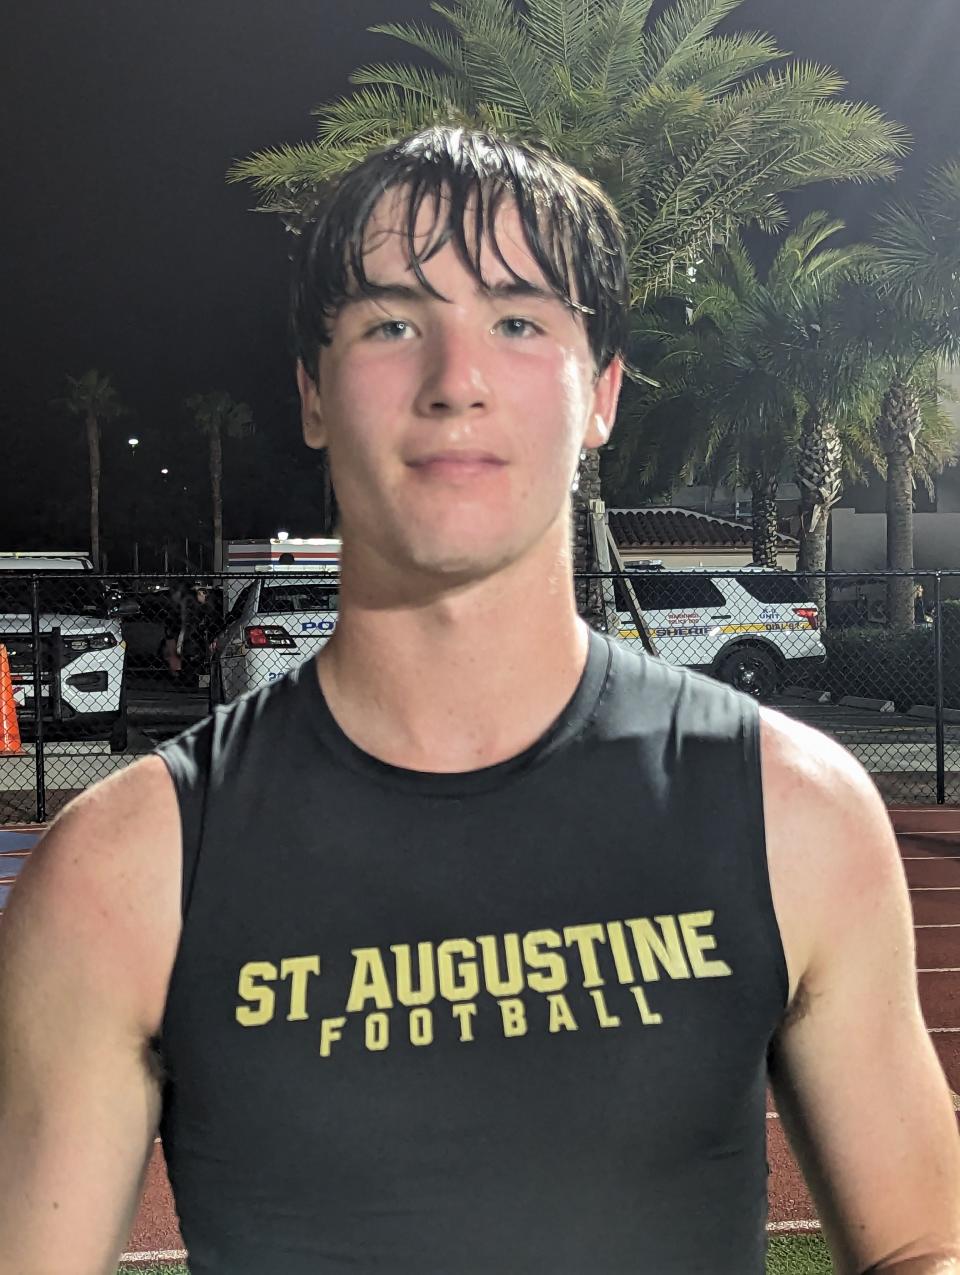 St. Augustine quarterback Locklan Hewlett led the Jackets' comeback from 15 points down against Bolles.